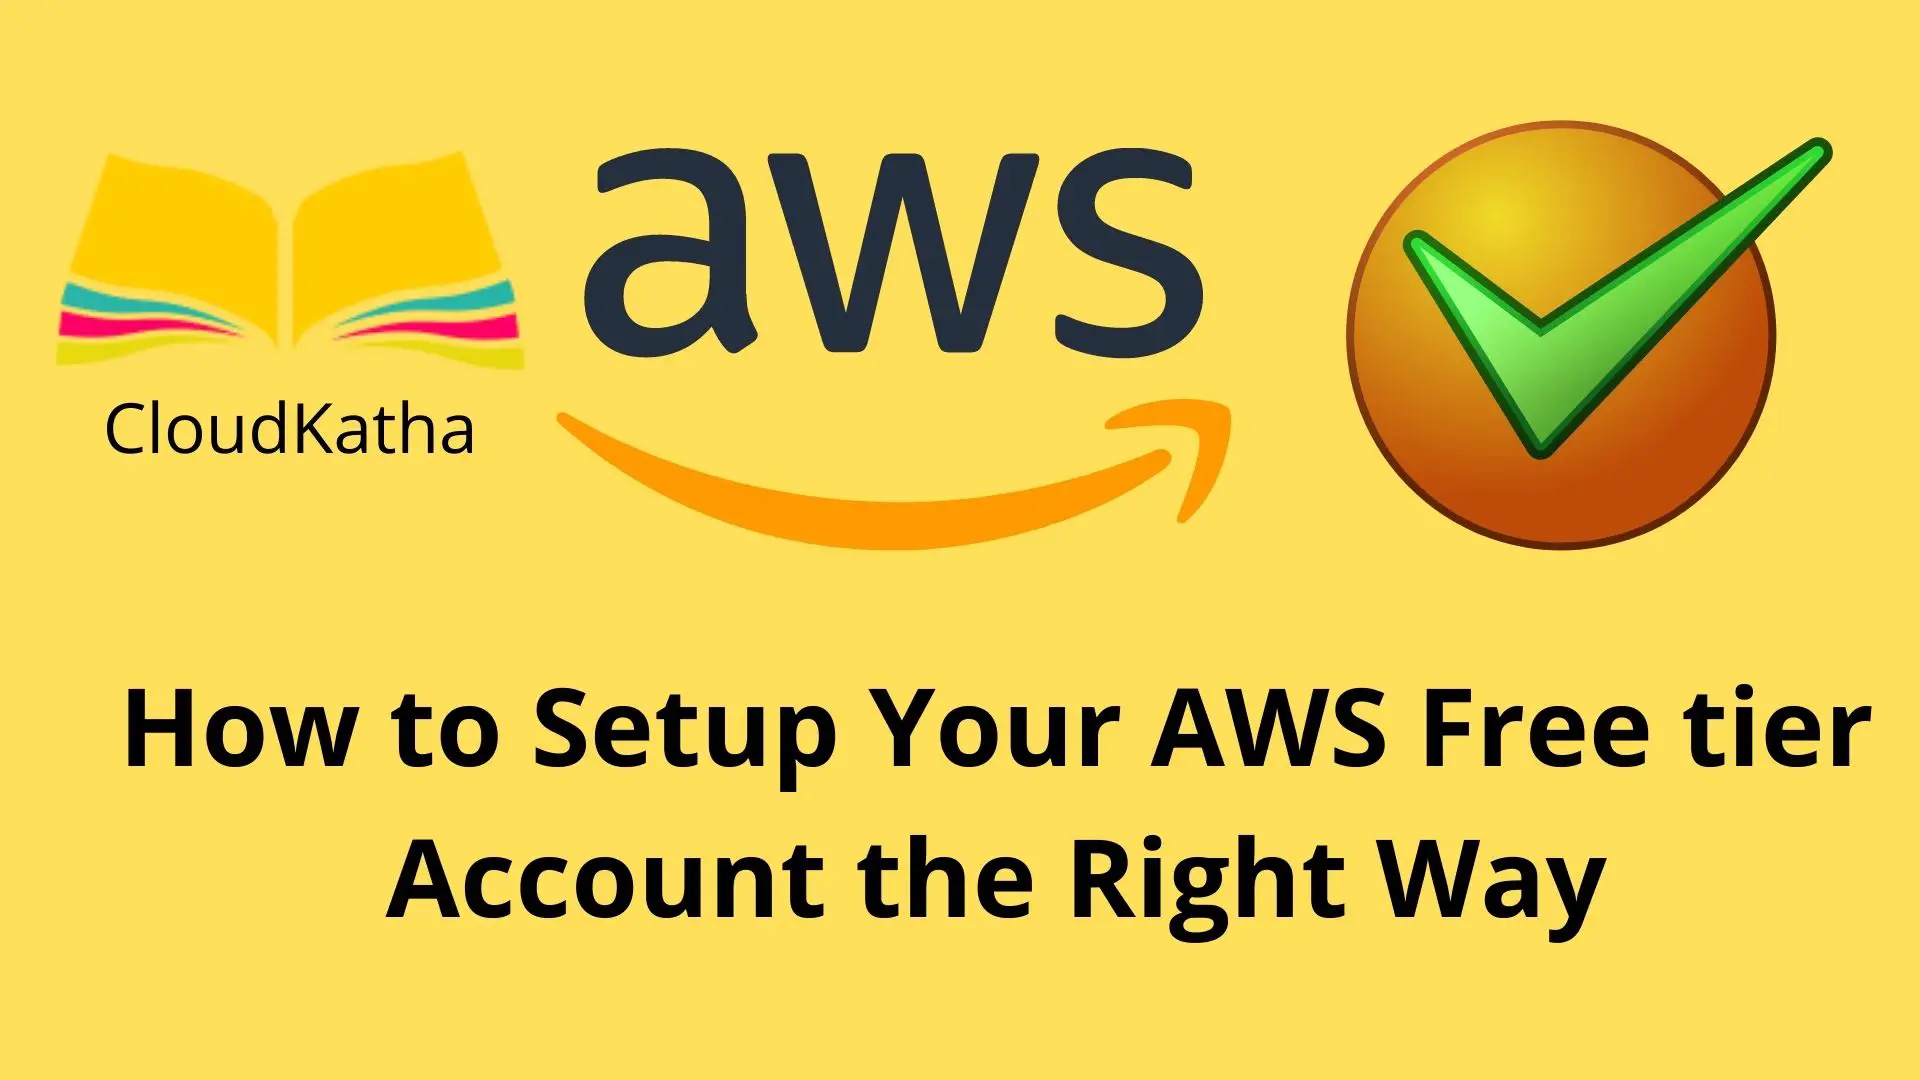 How to Setup Your AWS Free tier Account the Right Way